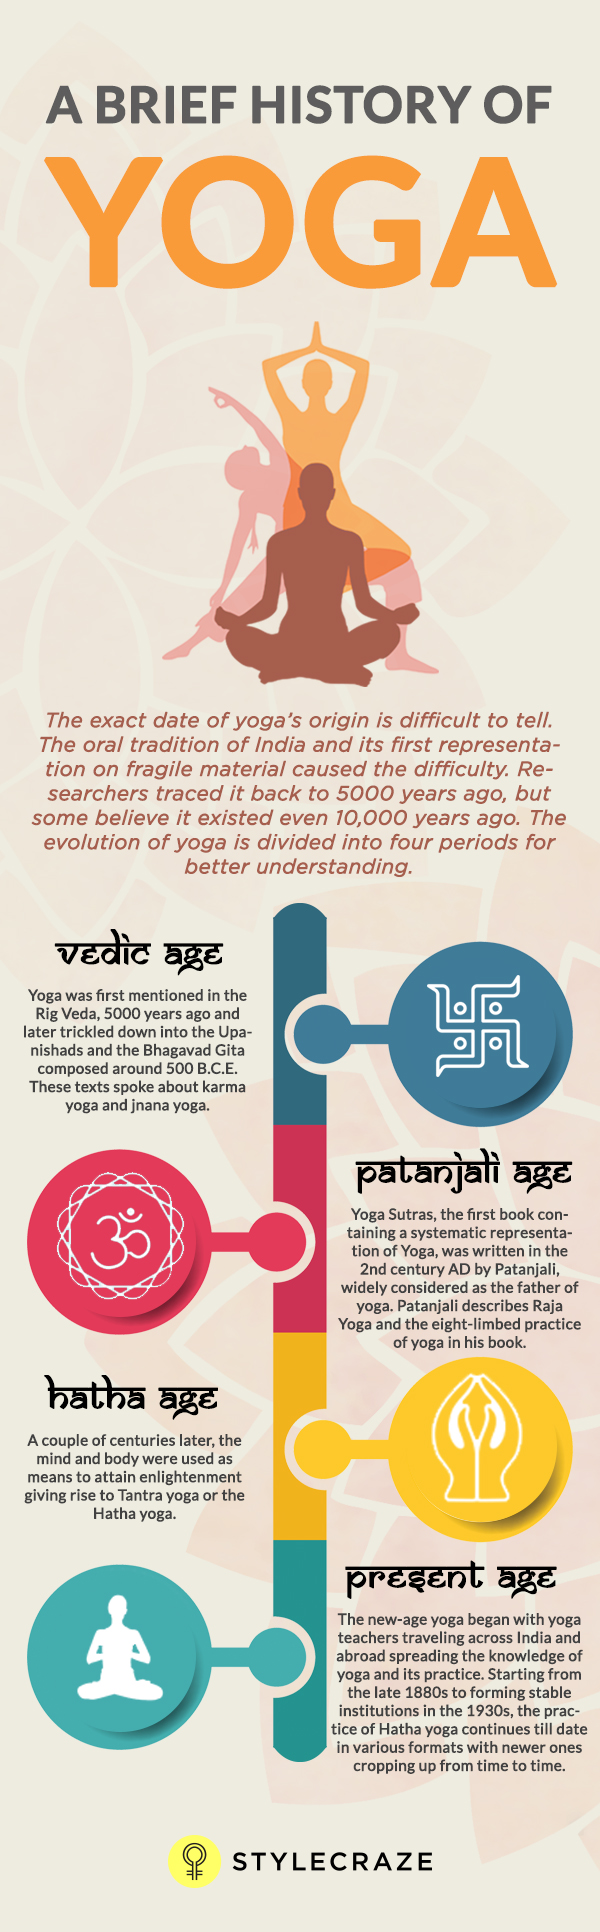 What Is Yoga